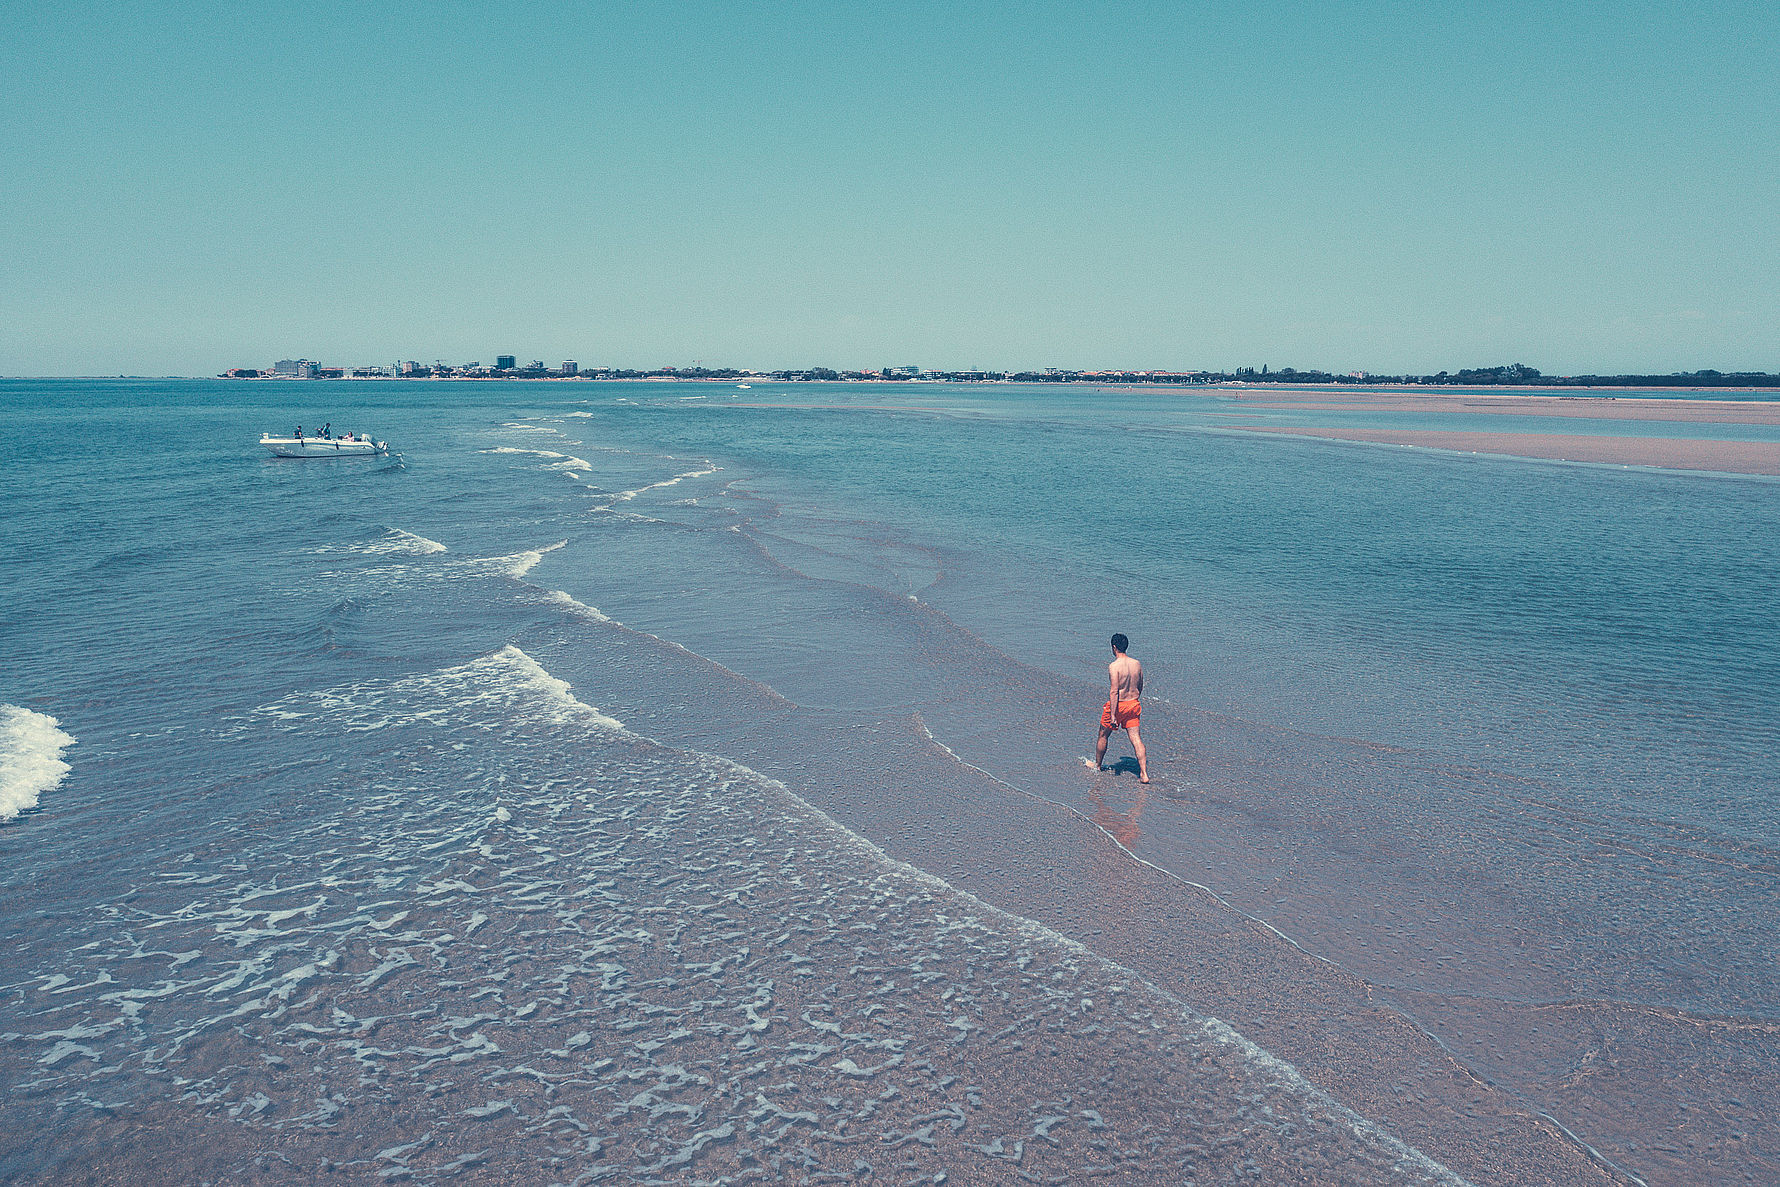 Child walking in shallow water